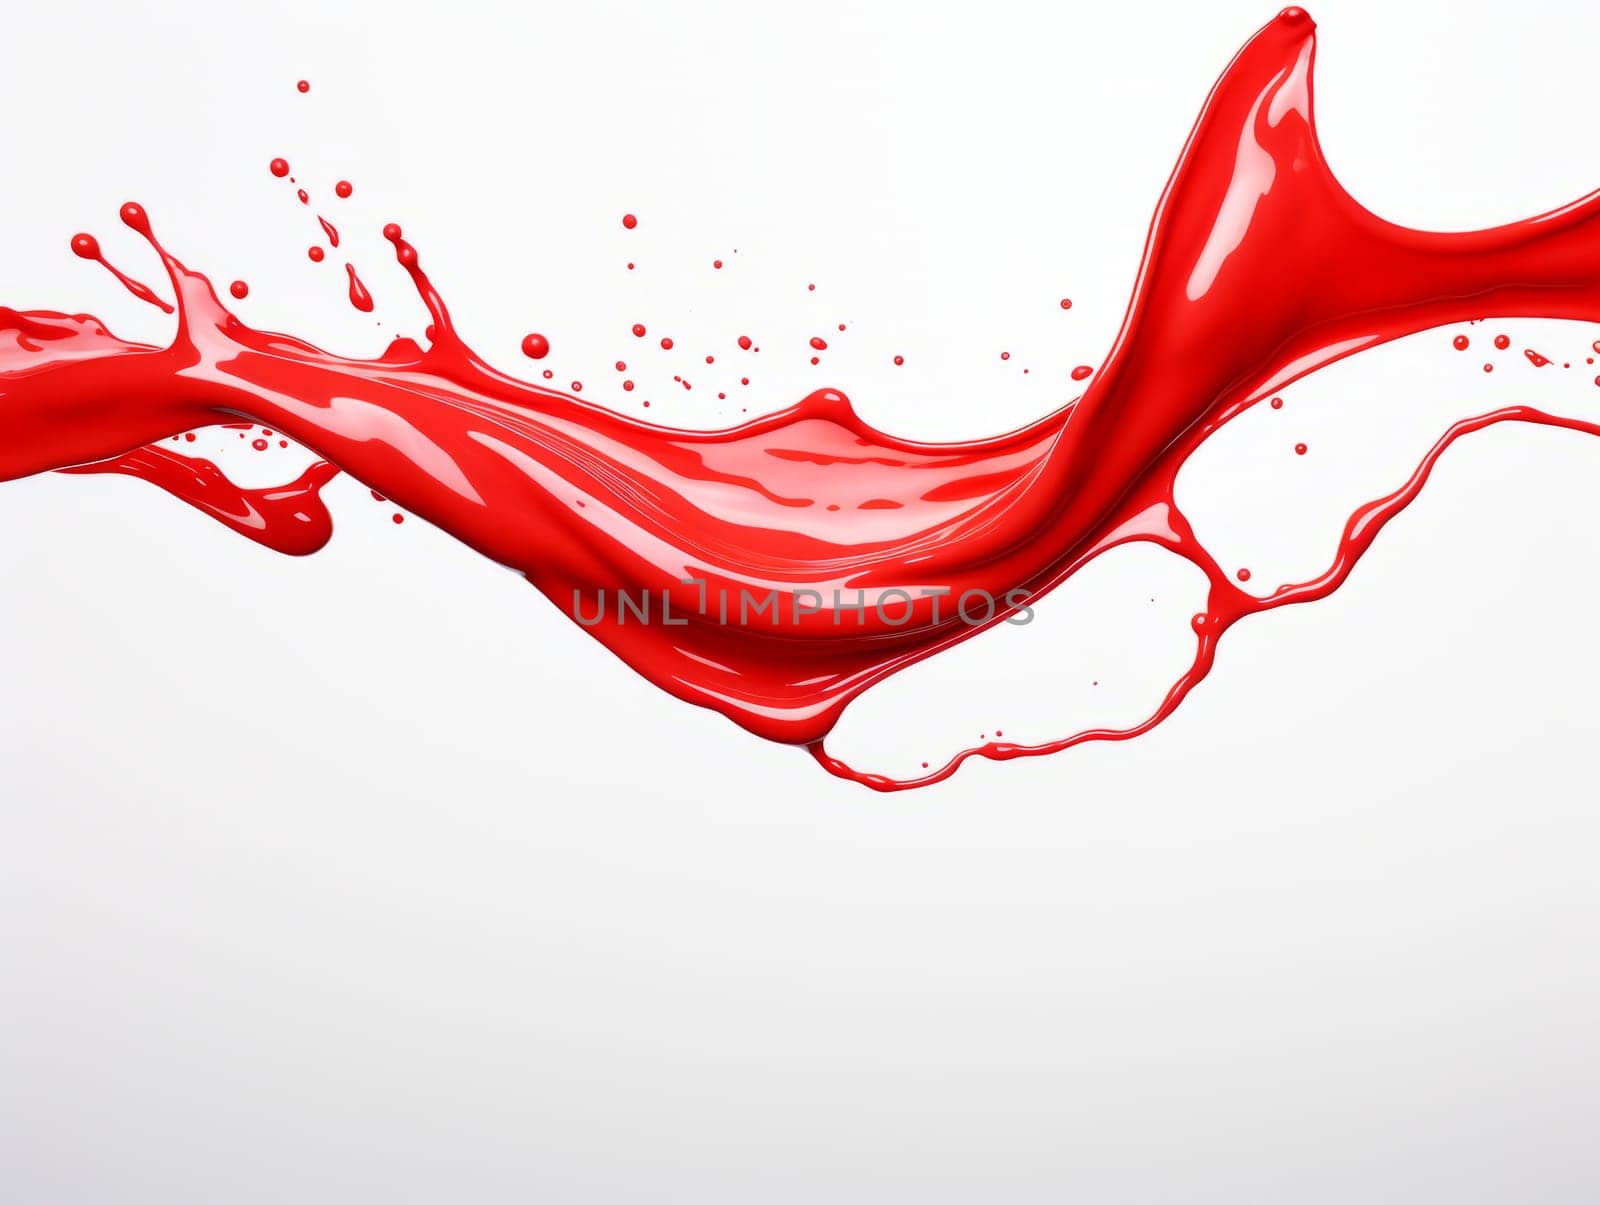 red paint splash on white background by but_photo